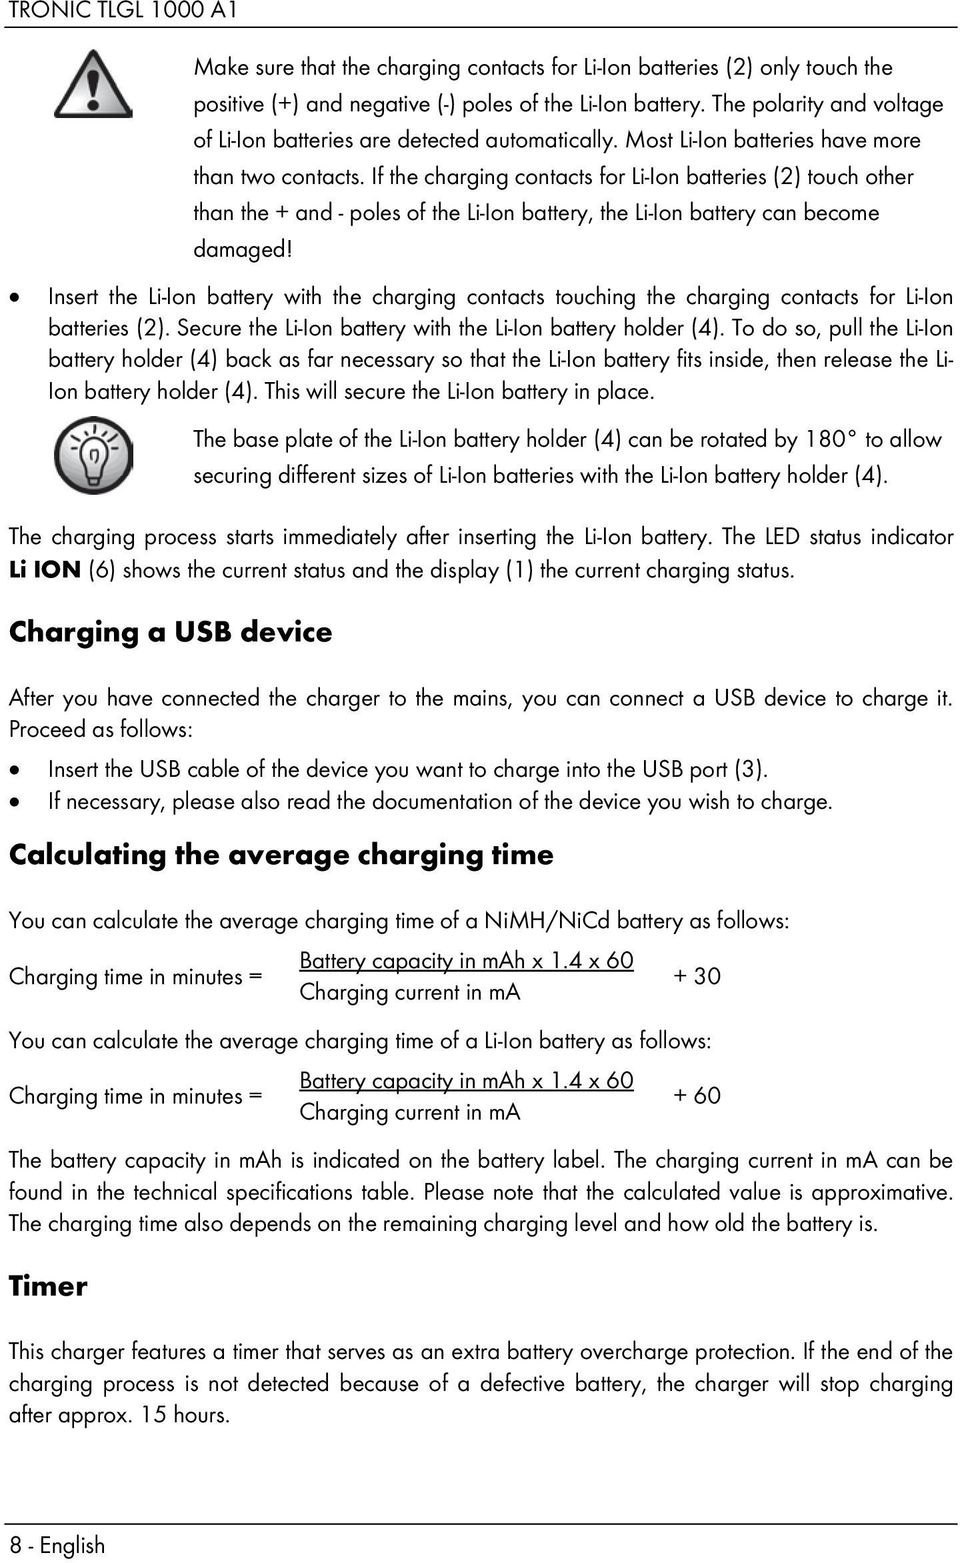 If the charging contacts for Li-Ion batteries (2) touch other than the + and - poles of the Li-Ion battery, the Li-Ion battery can become damaged!